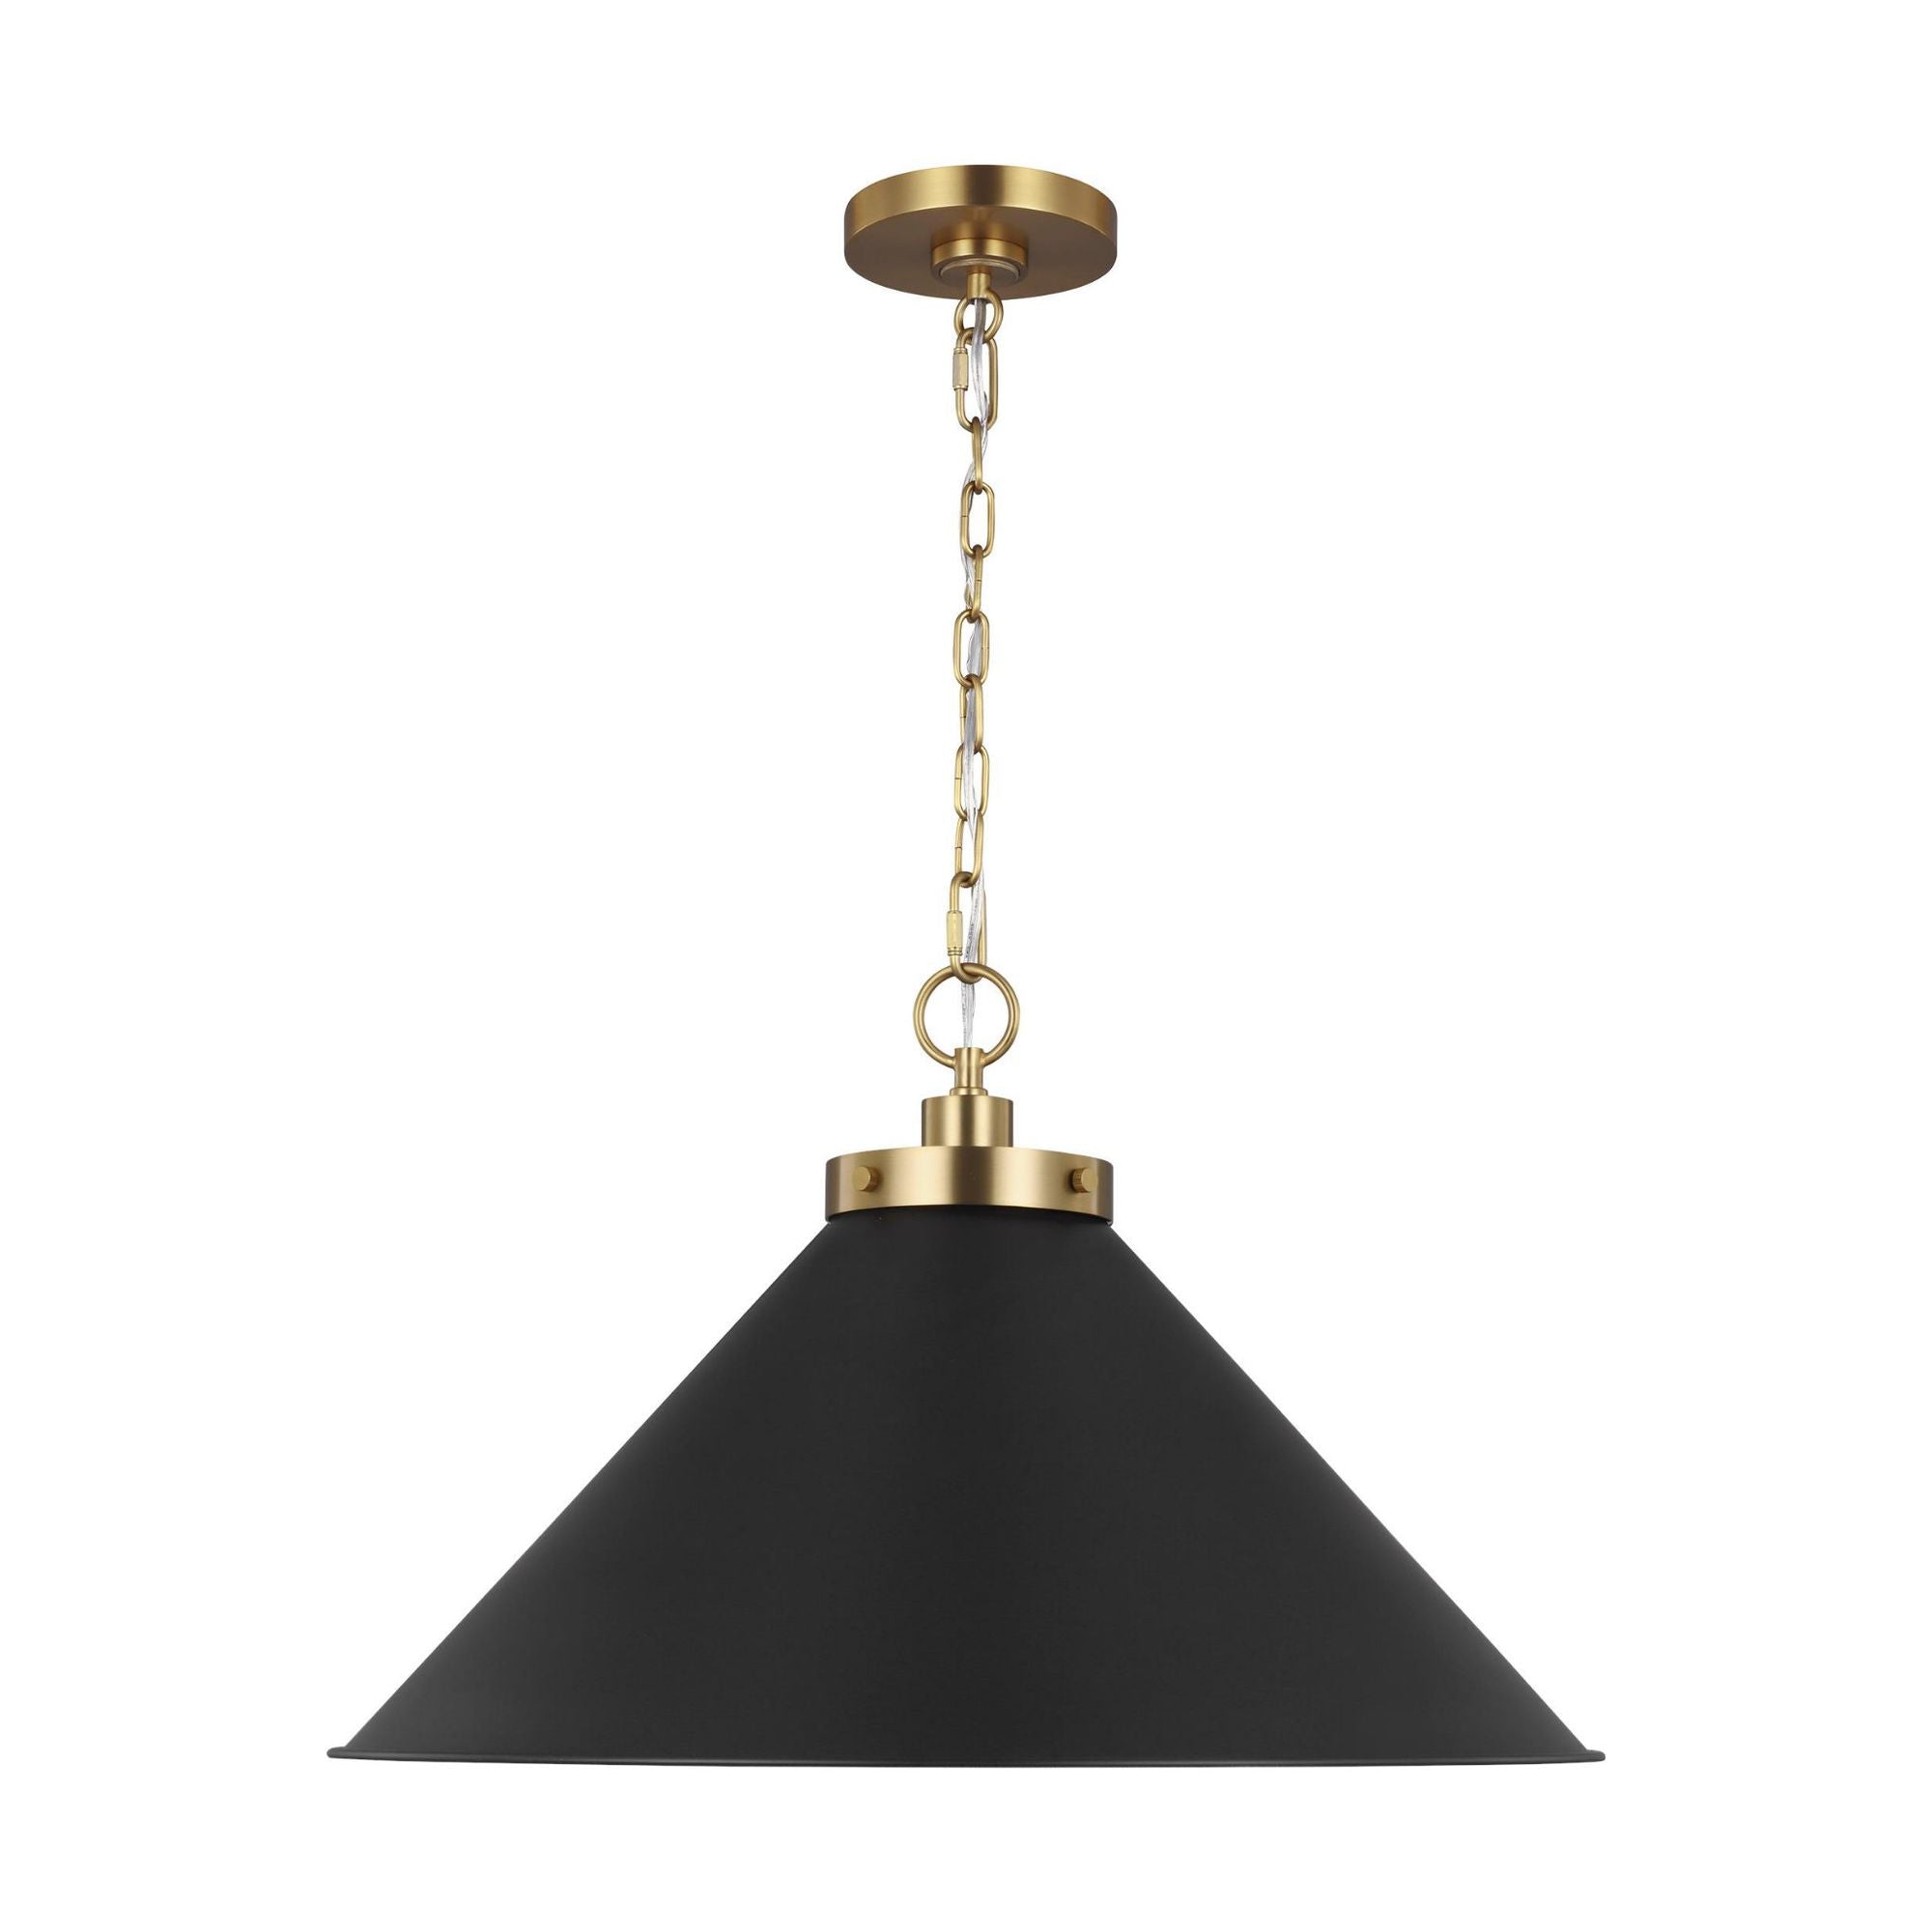 Chapman & Myers Wellfleet Wide Cone Pendant in Midnight Black and Burnished Brass